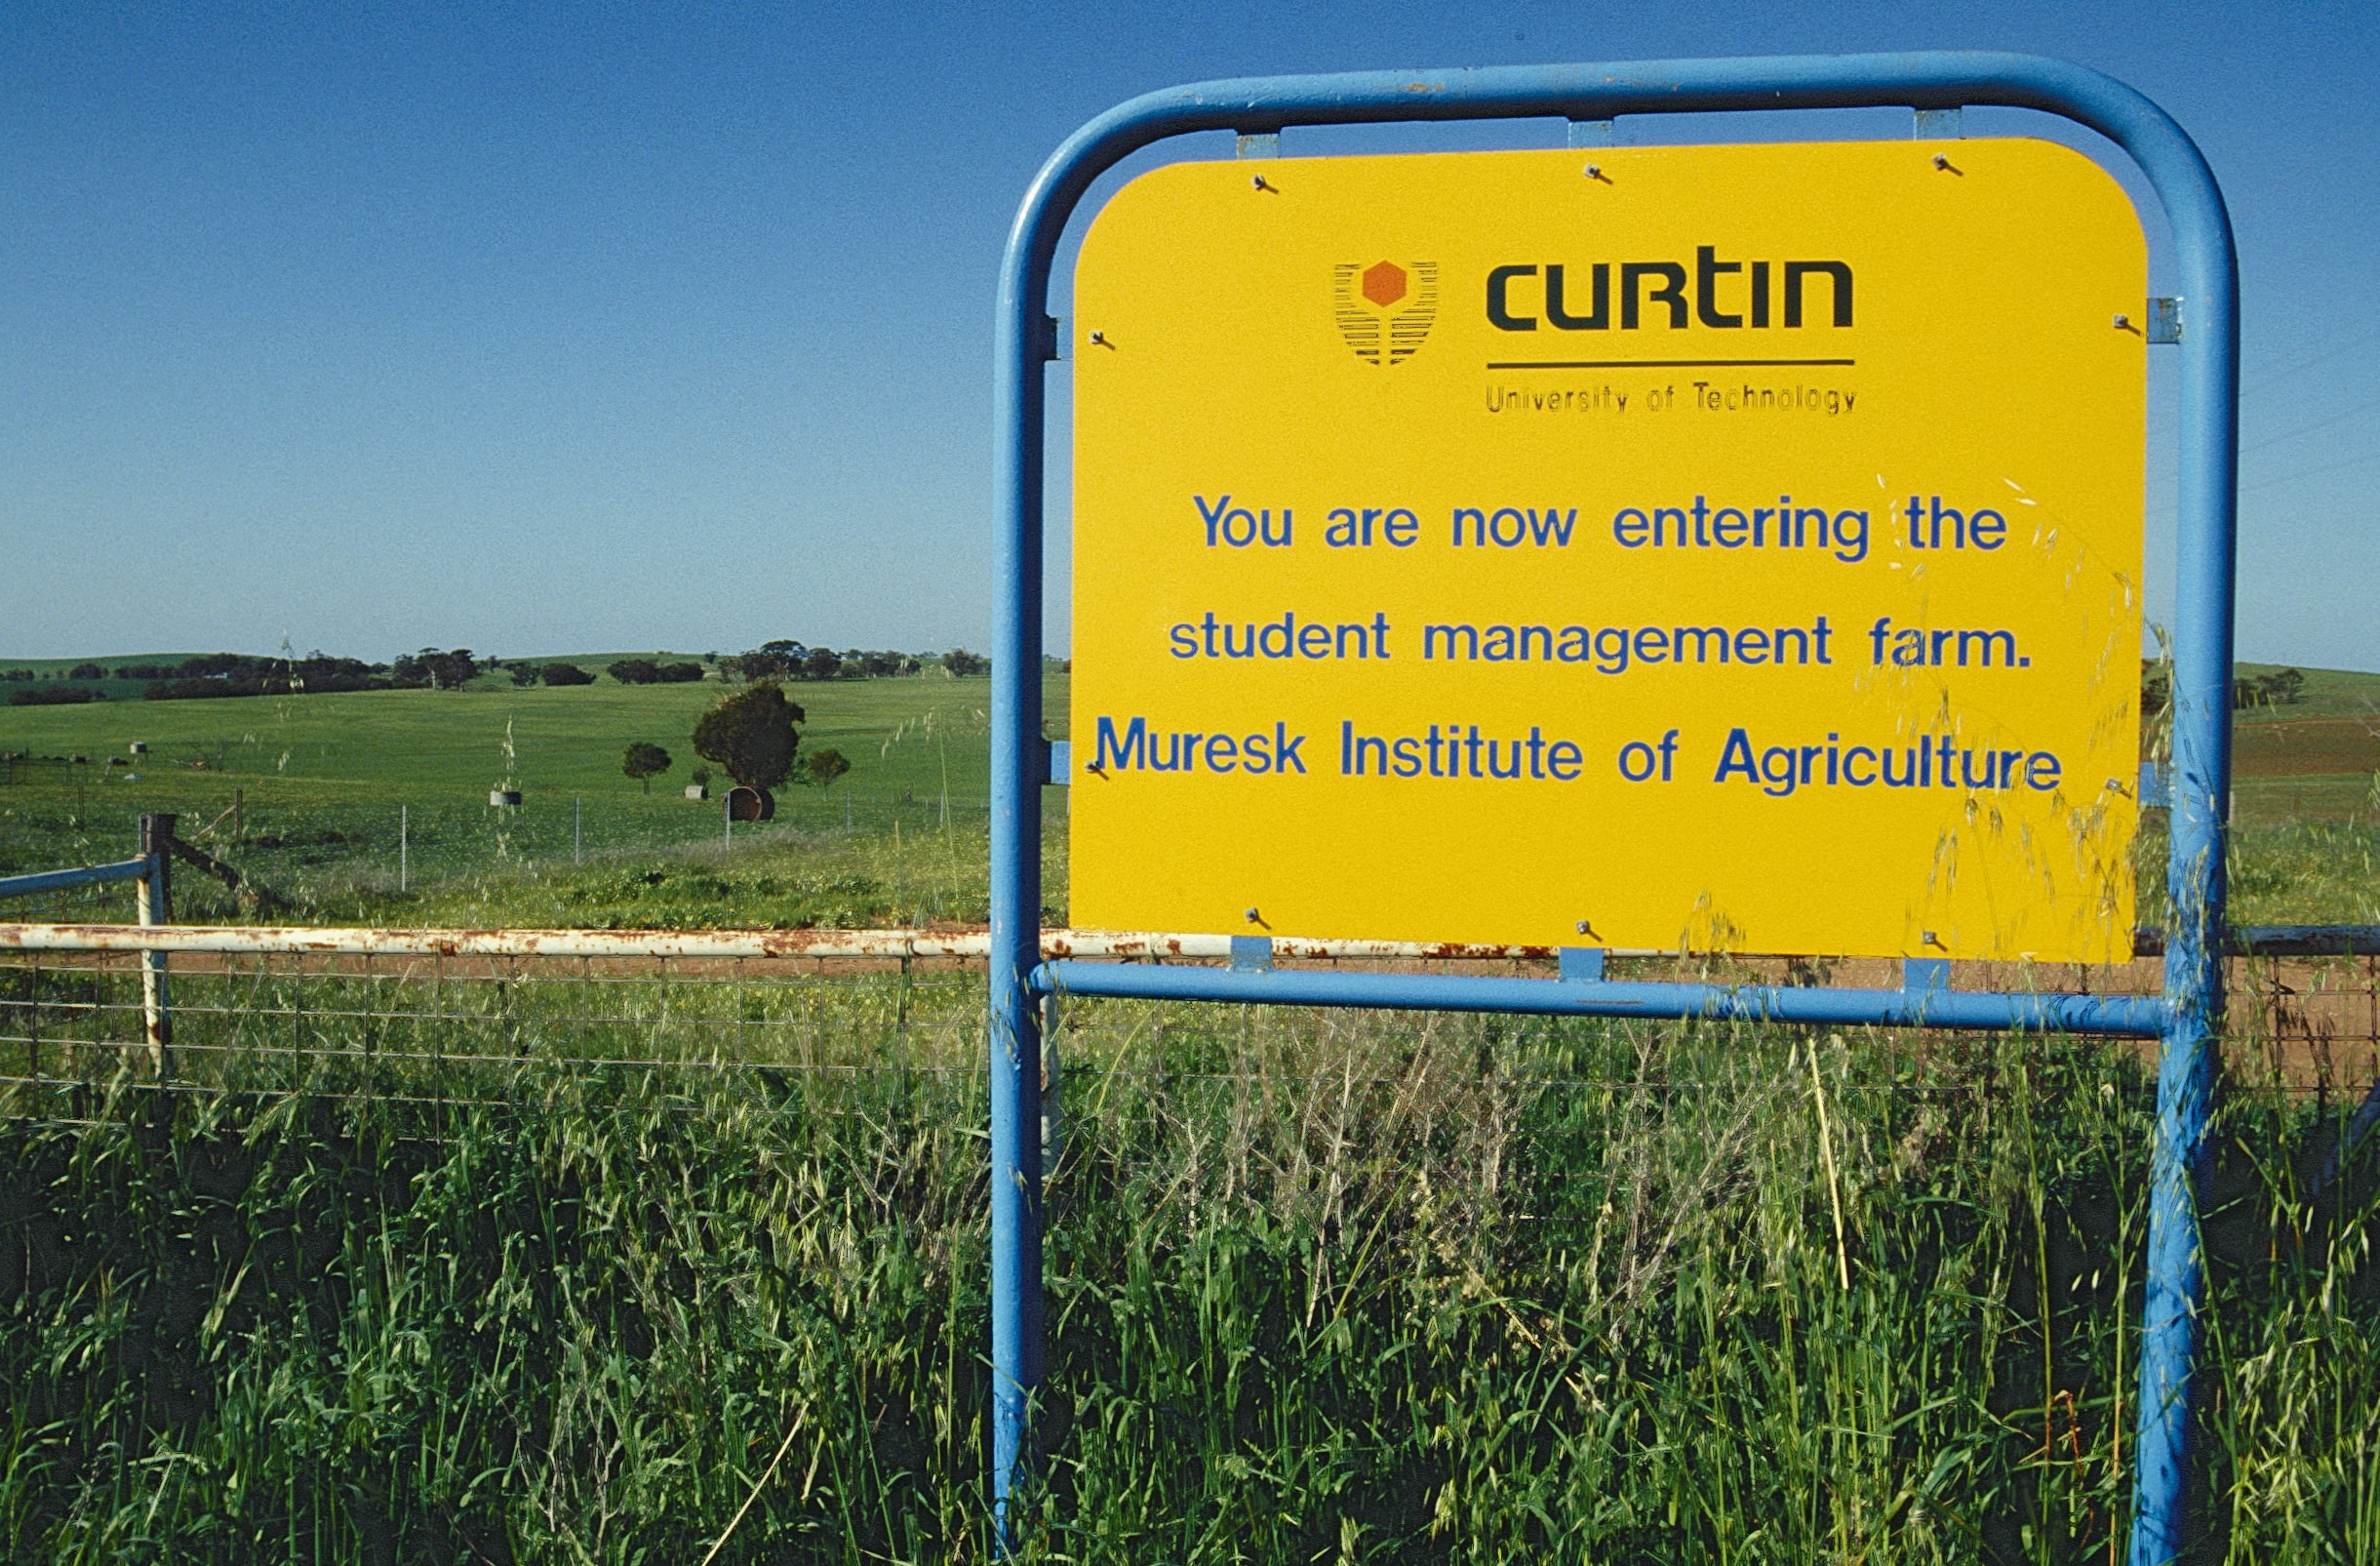 Yellow sign in front of a green field, it says "You are now entering the student management farm at the Muresk Institute of Agriculture."